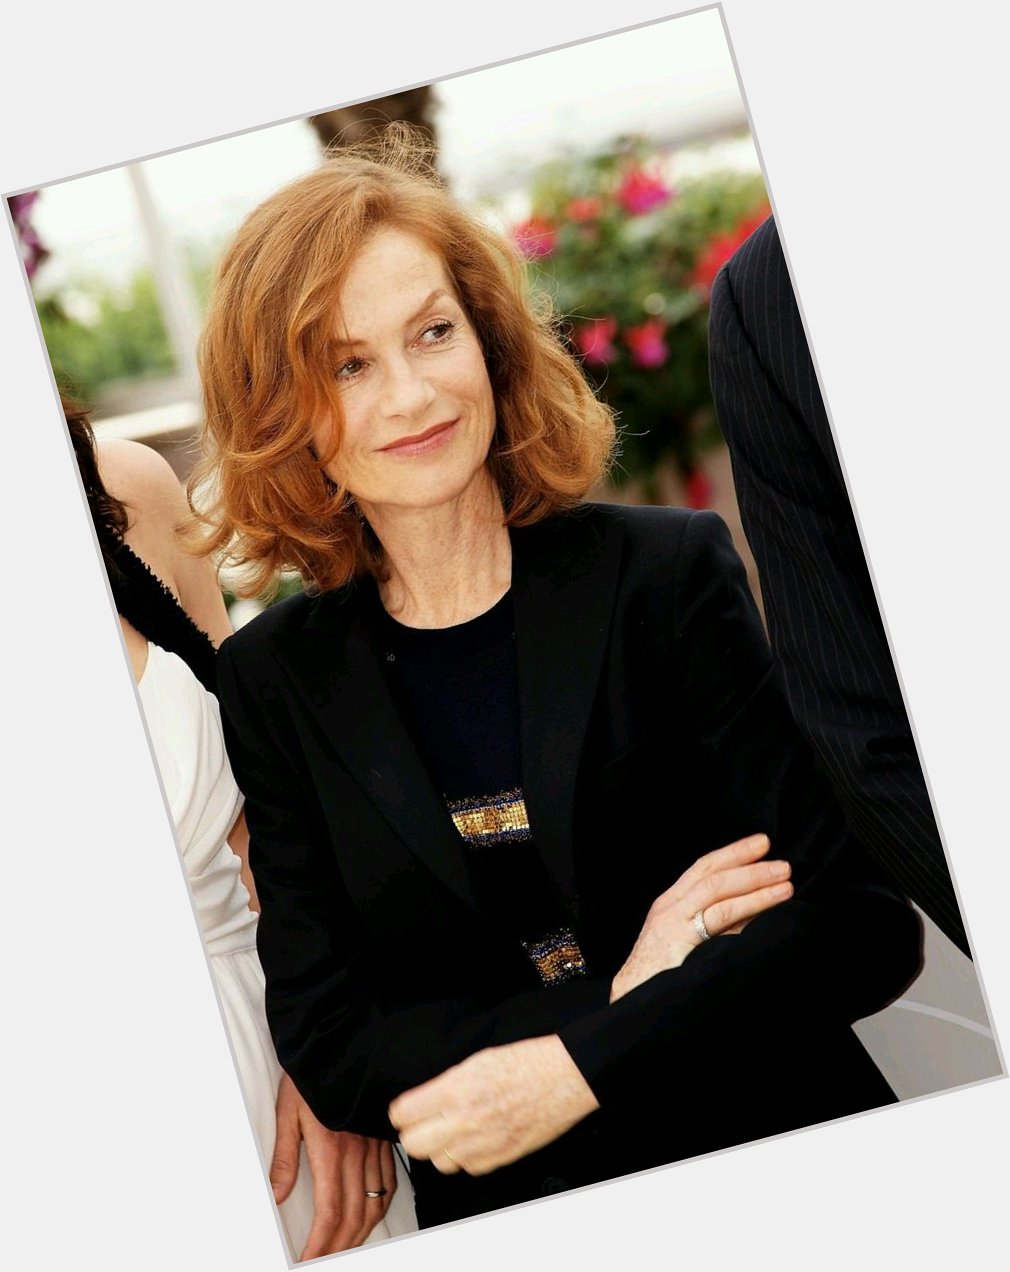 Wishing a very happy birthday to the inimitable Isabelle Huppert. 